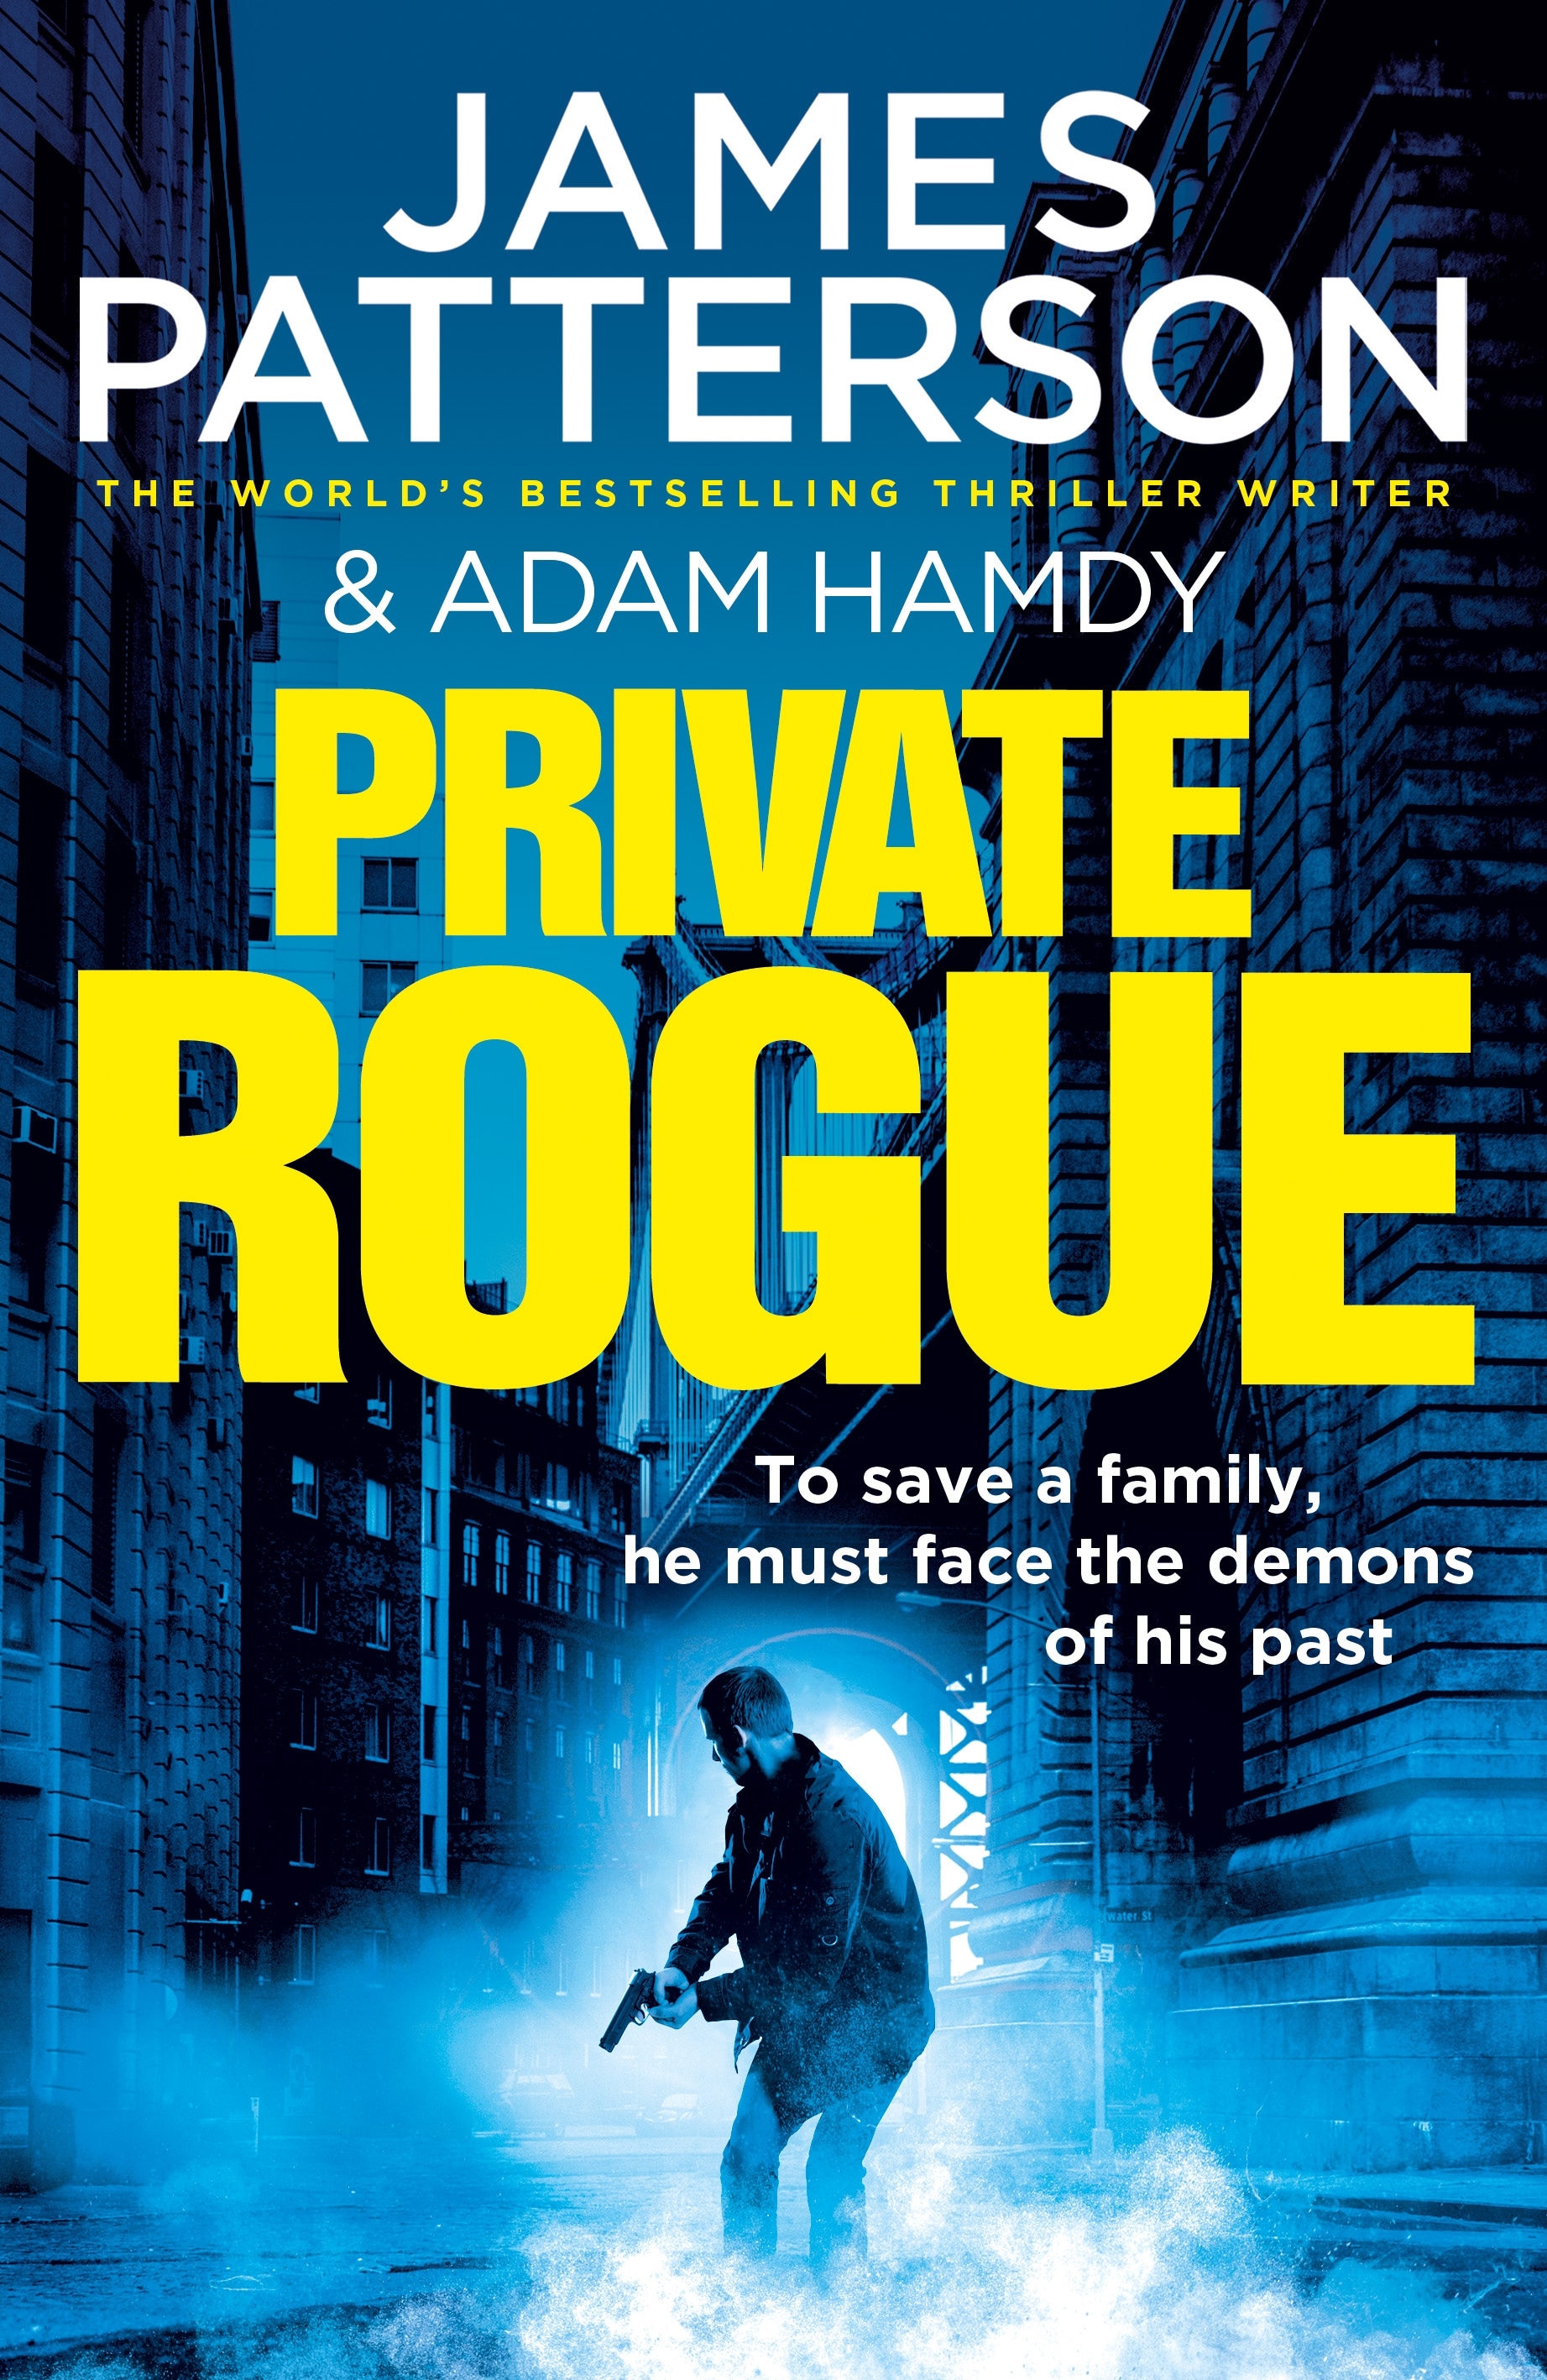 Book “Private Rogue” by James Patterson, Adam Hamdy — July 8, 2021